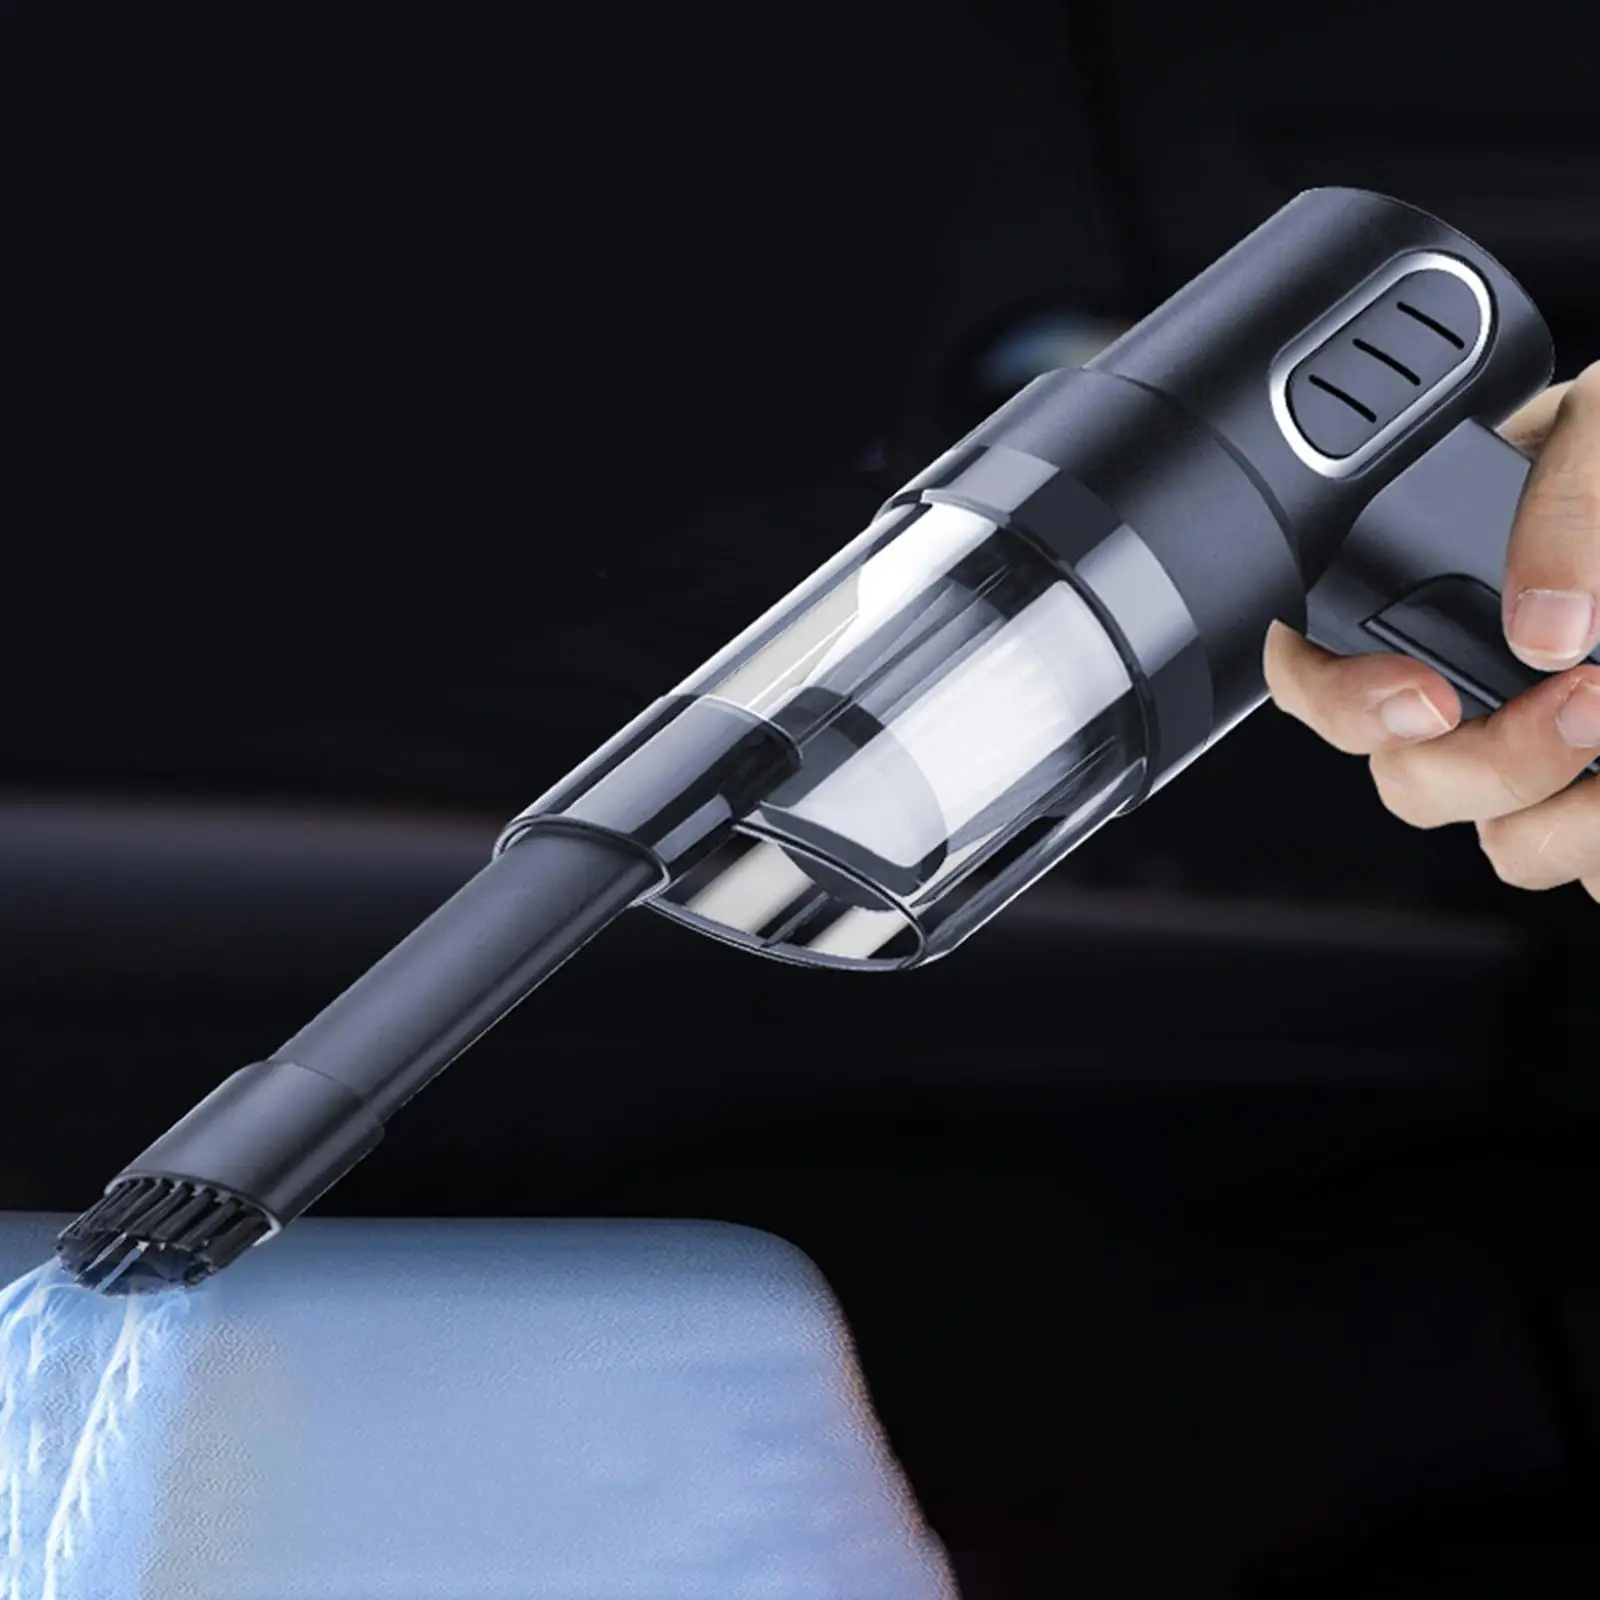 Car Vacuum Cleaner HEPA Filter Cordless Wet and Dry Cleaning Handheld with